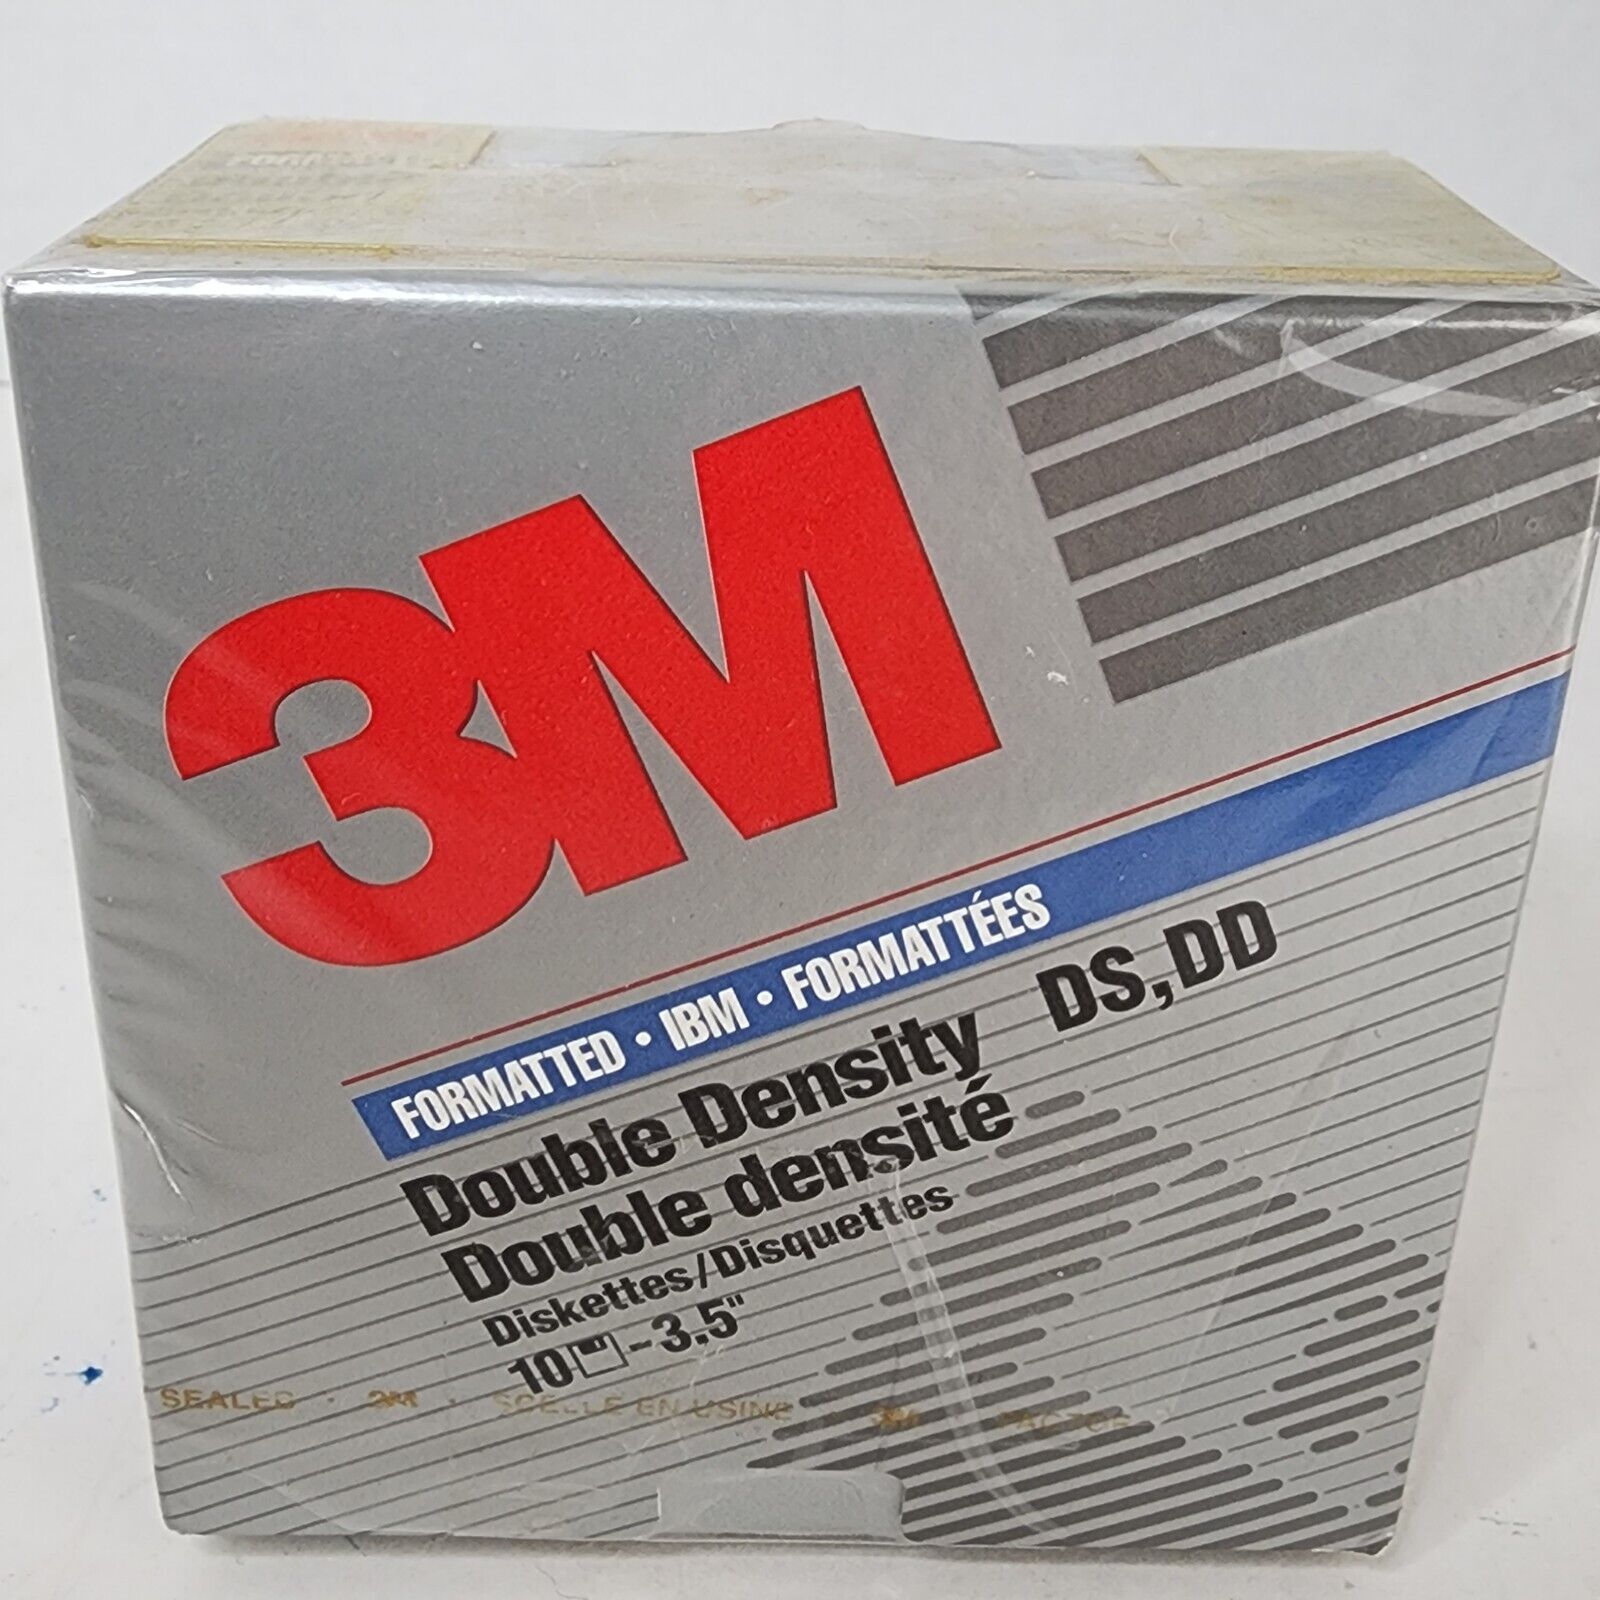 NEW 3M DS DD 3.5in Diskettes Formatted IBM (Box of 10) FACTORY SEALED VG